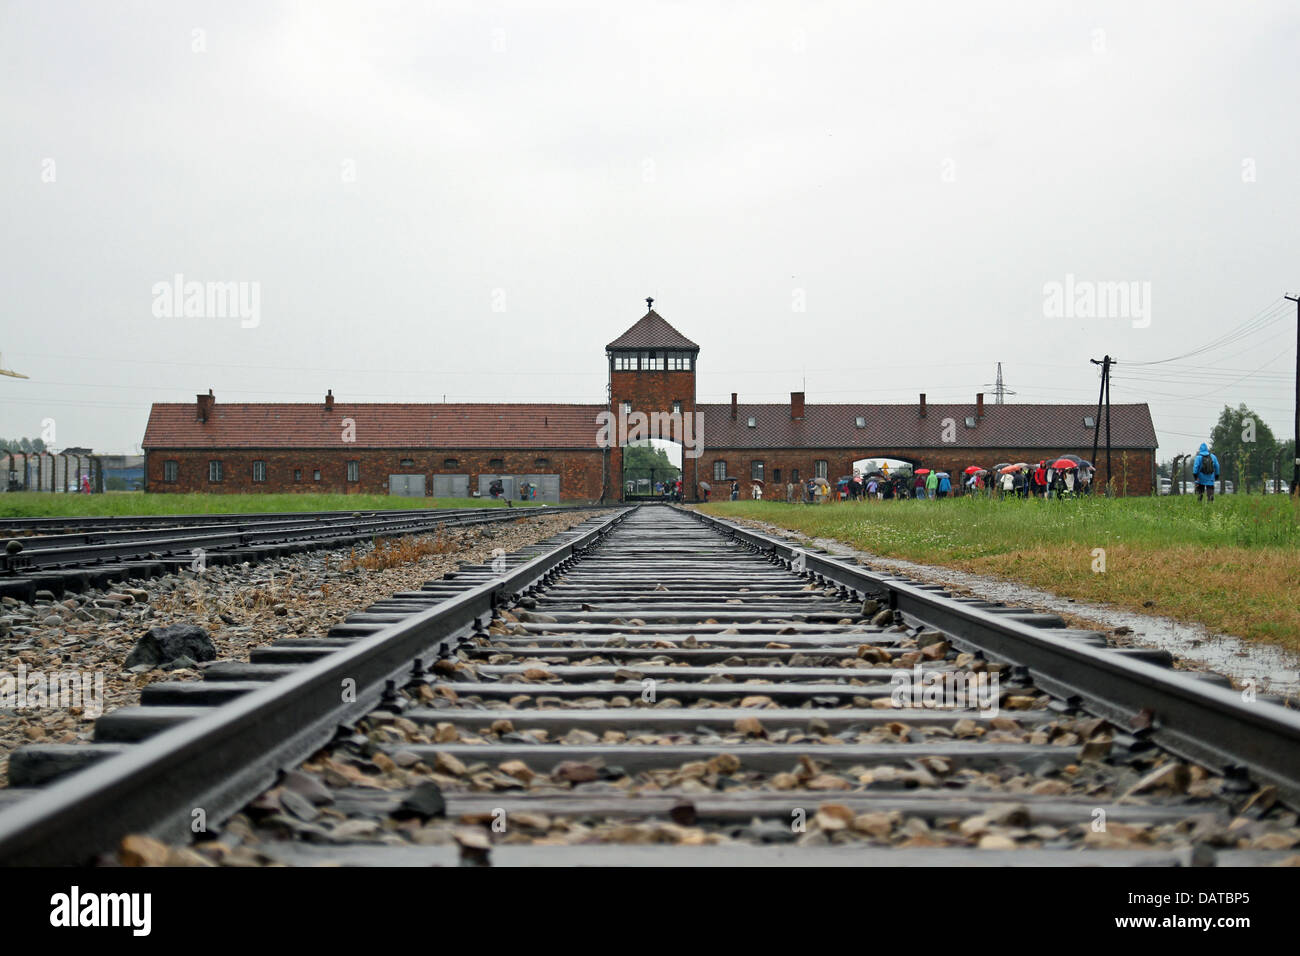 In the distance the main entrance to Auschwitz Birkenau Concentration Camp. Stock Photo